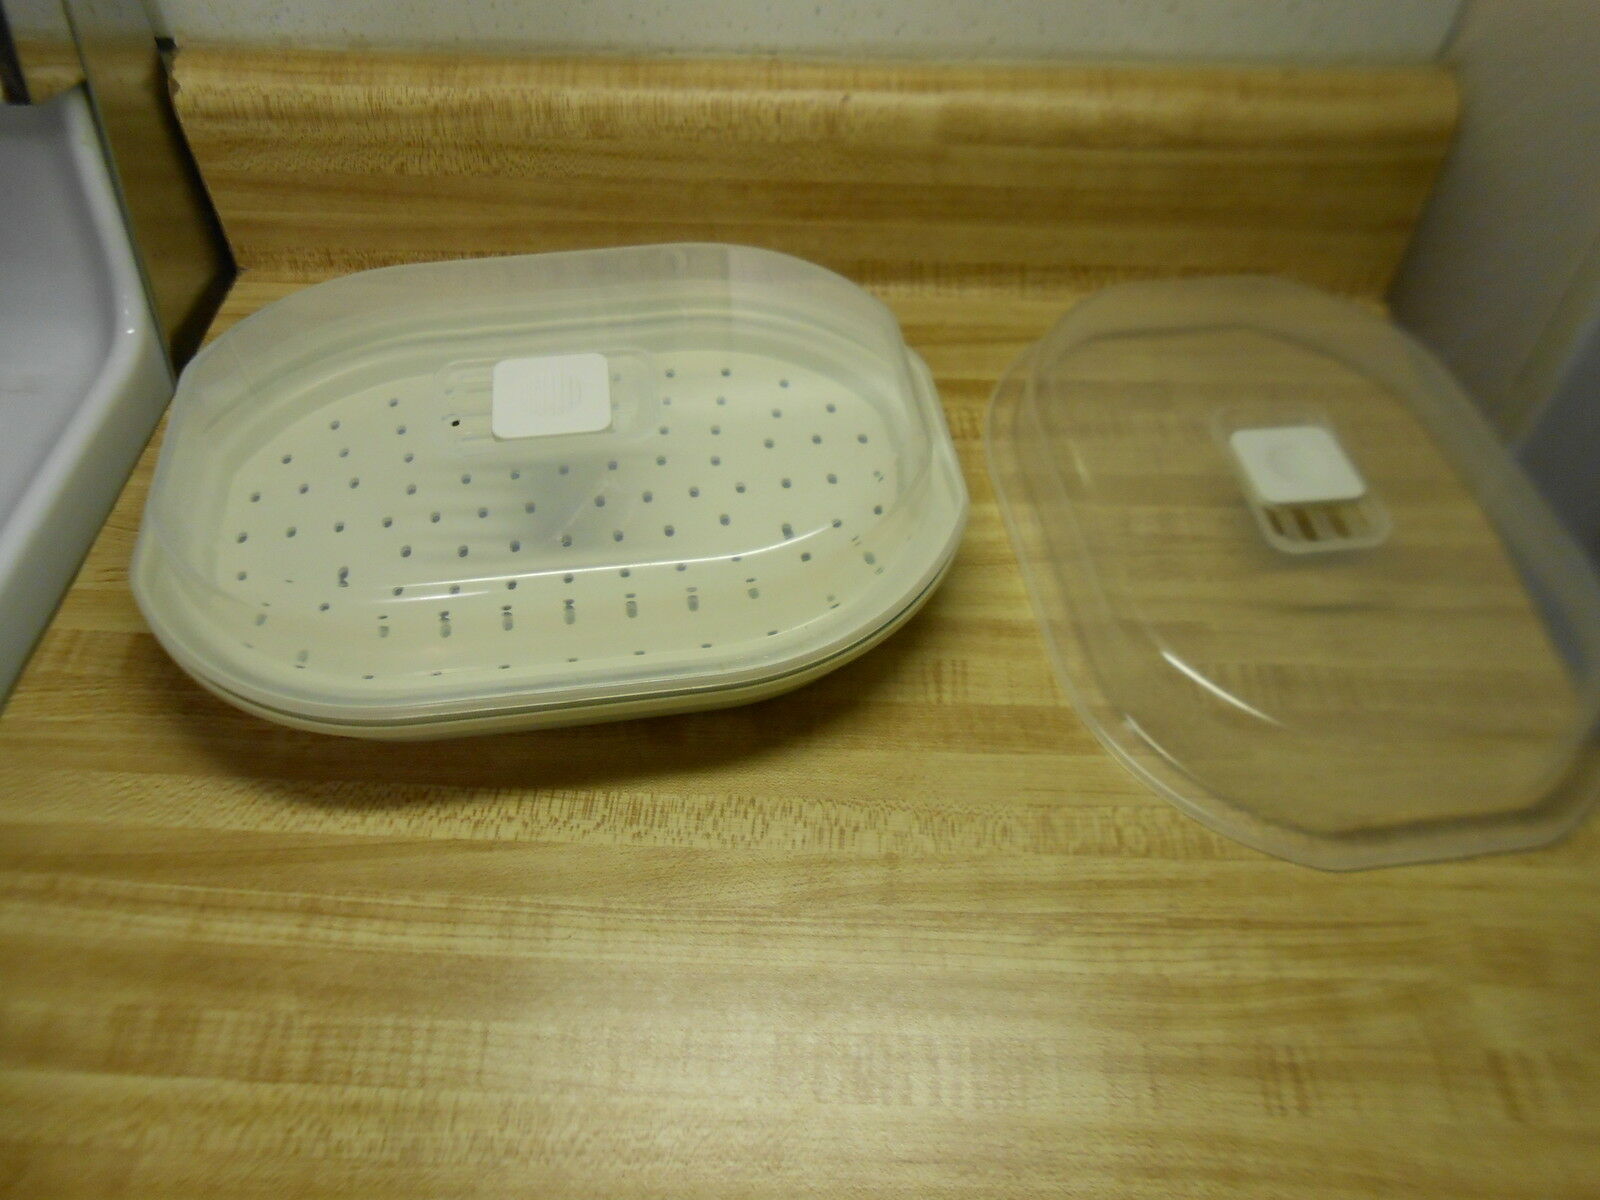 miracle ware for microwave cooking 3 piece - $23.70